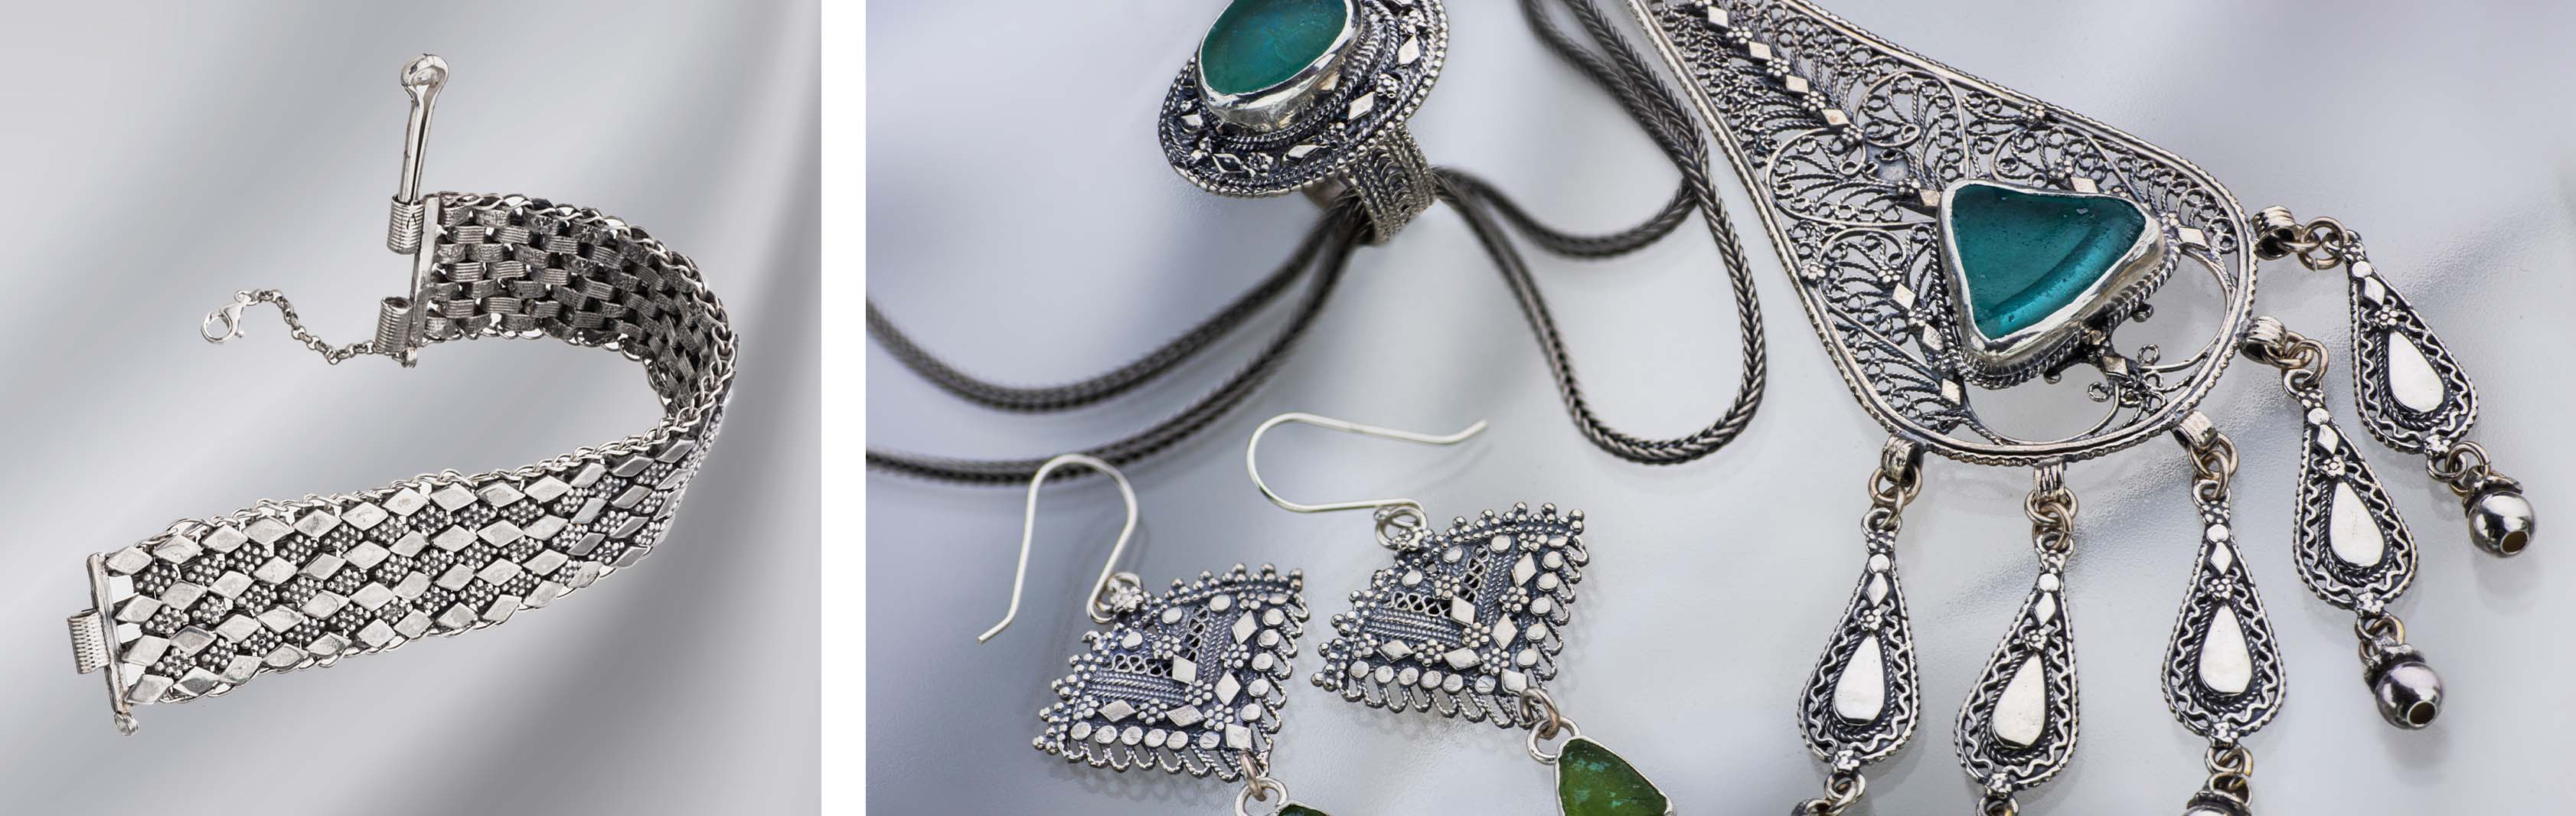 Shlomit Collection | 925 Sterling Silver Yemenite Filigree Jewelry set with Ancient Roman Glass